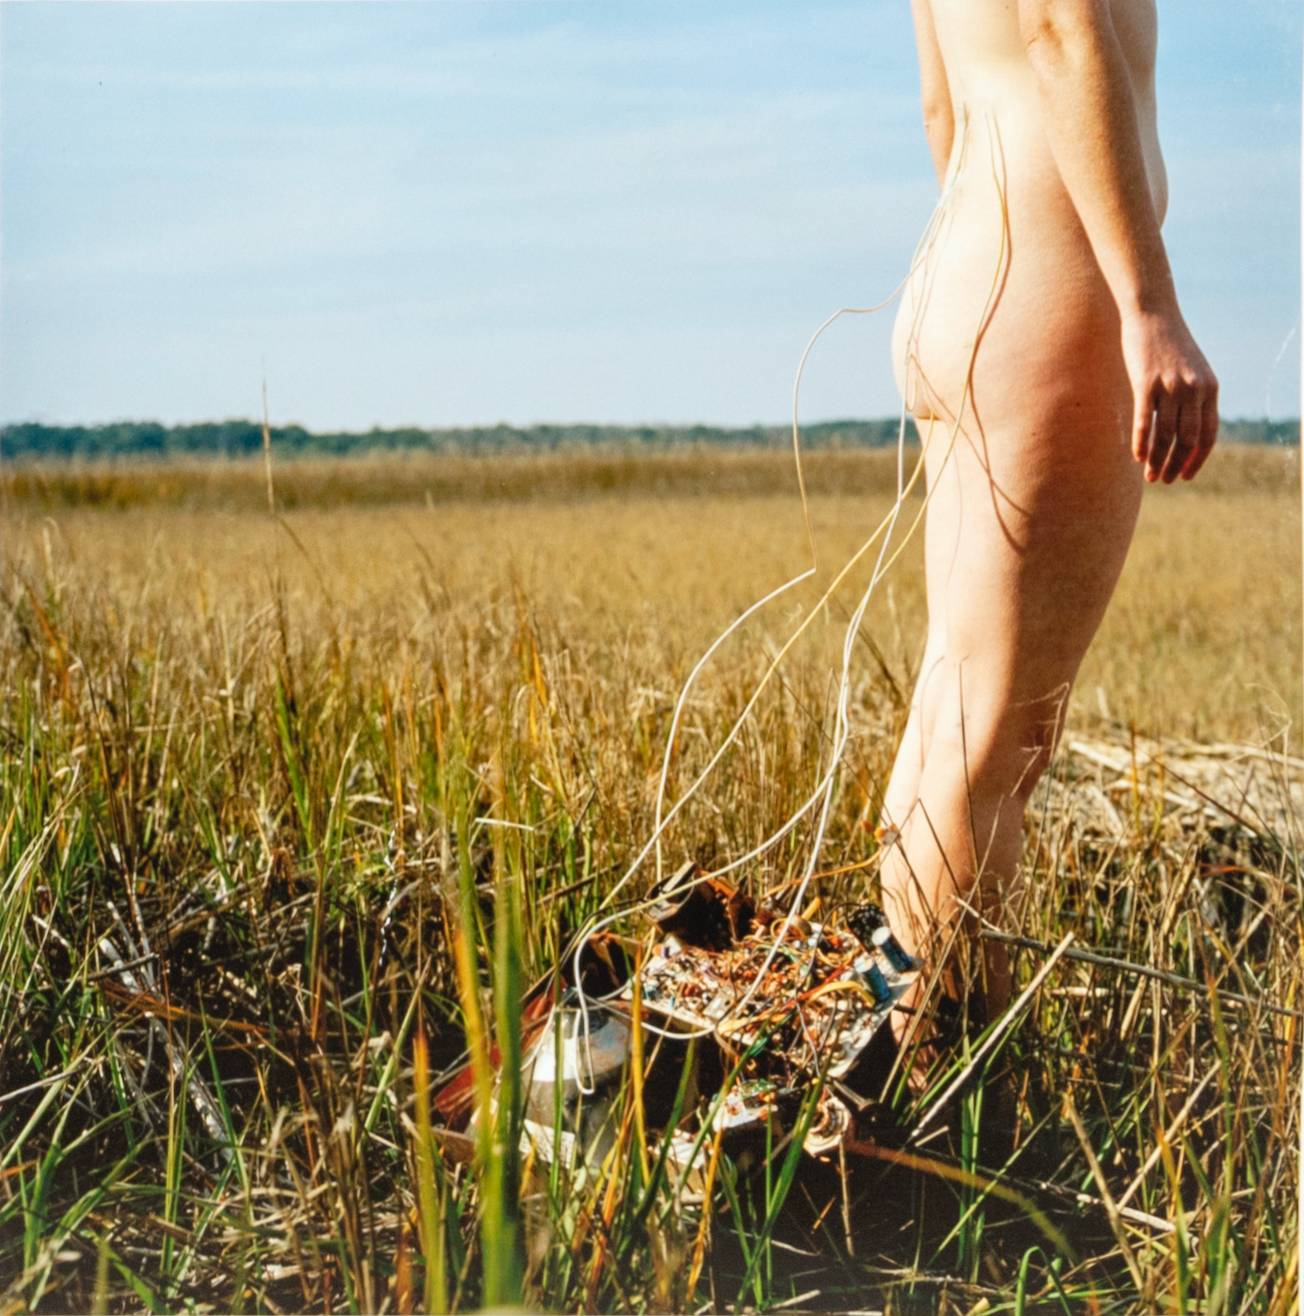 nude woman standing in field with wires attached to her back from the ground